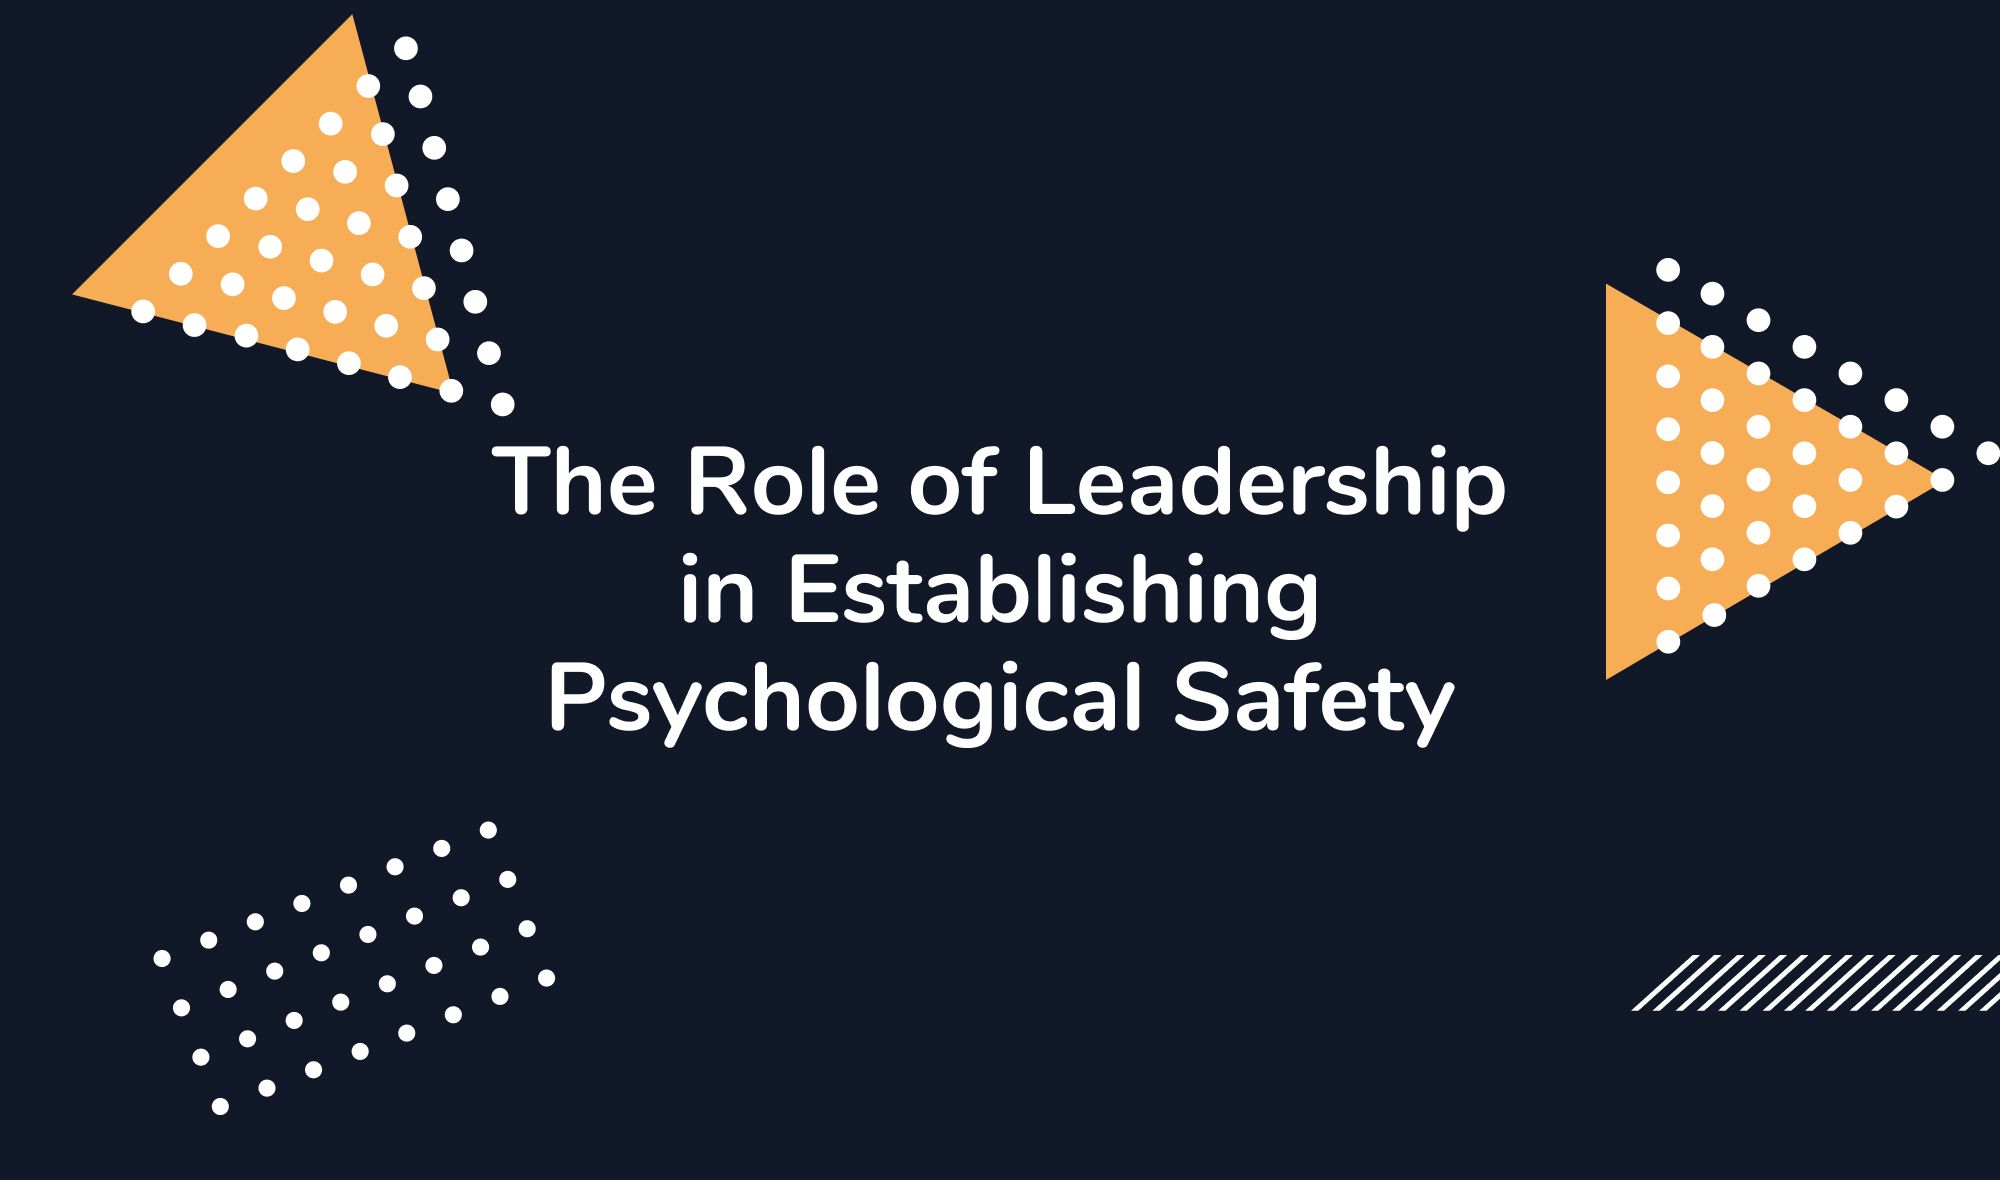 The Role of Leadership in Establishing Psychological Safety at the Workplace